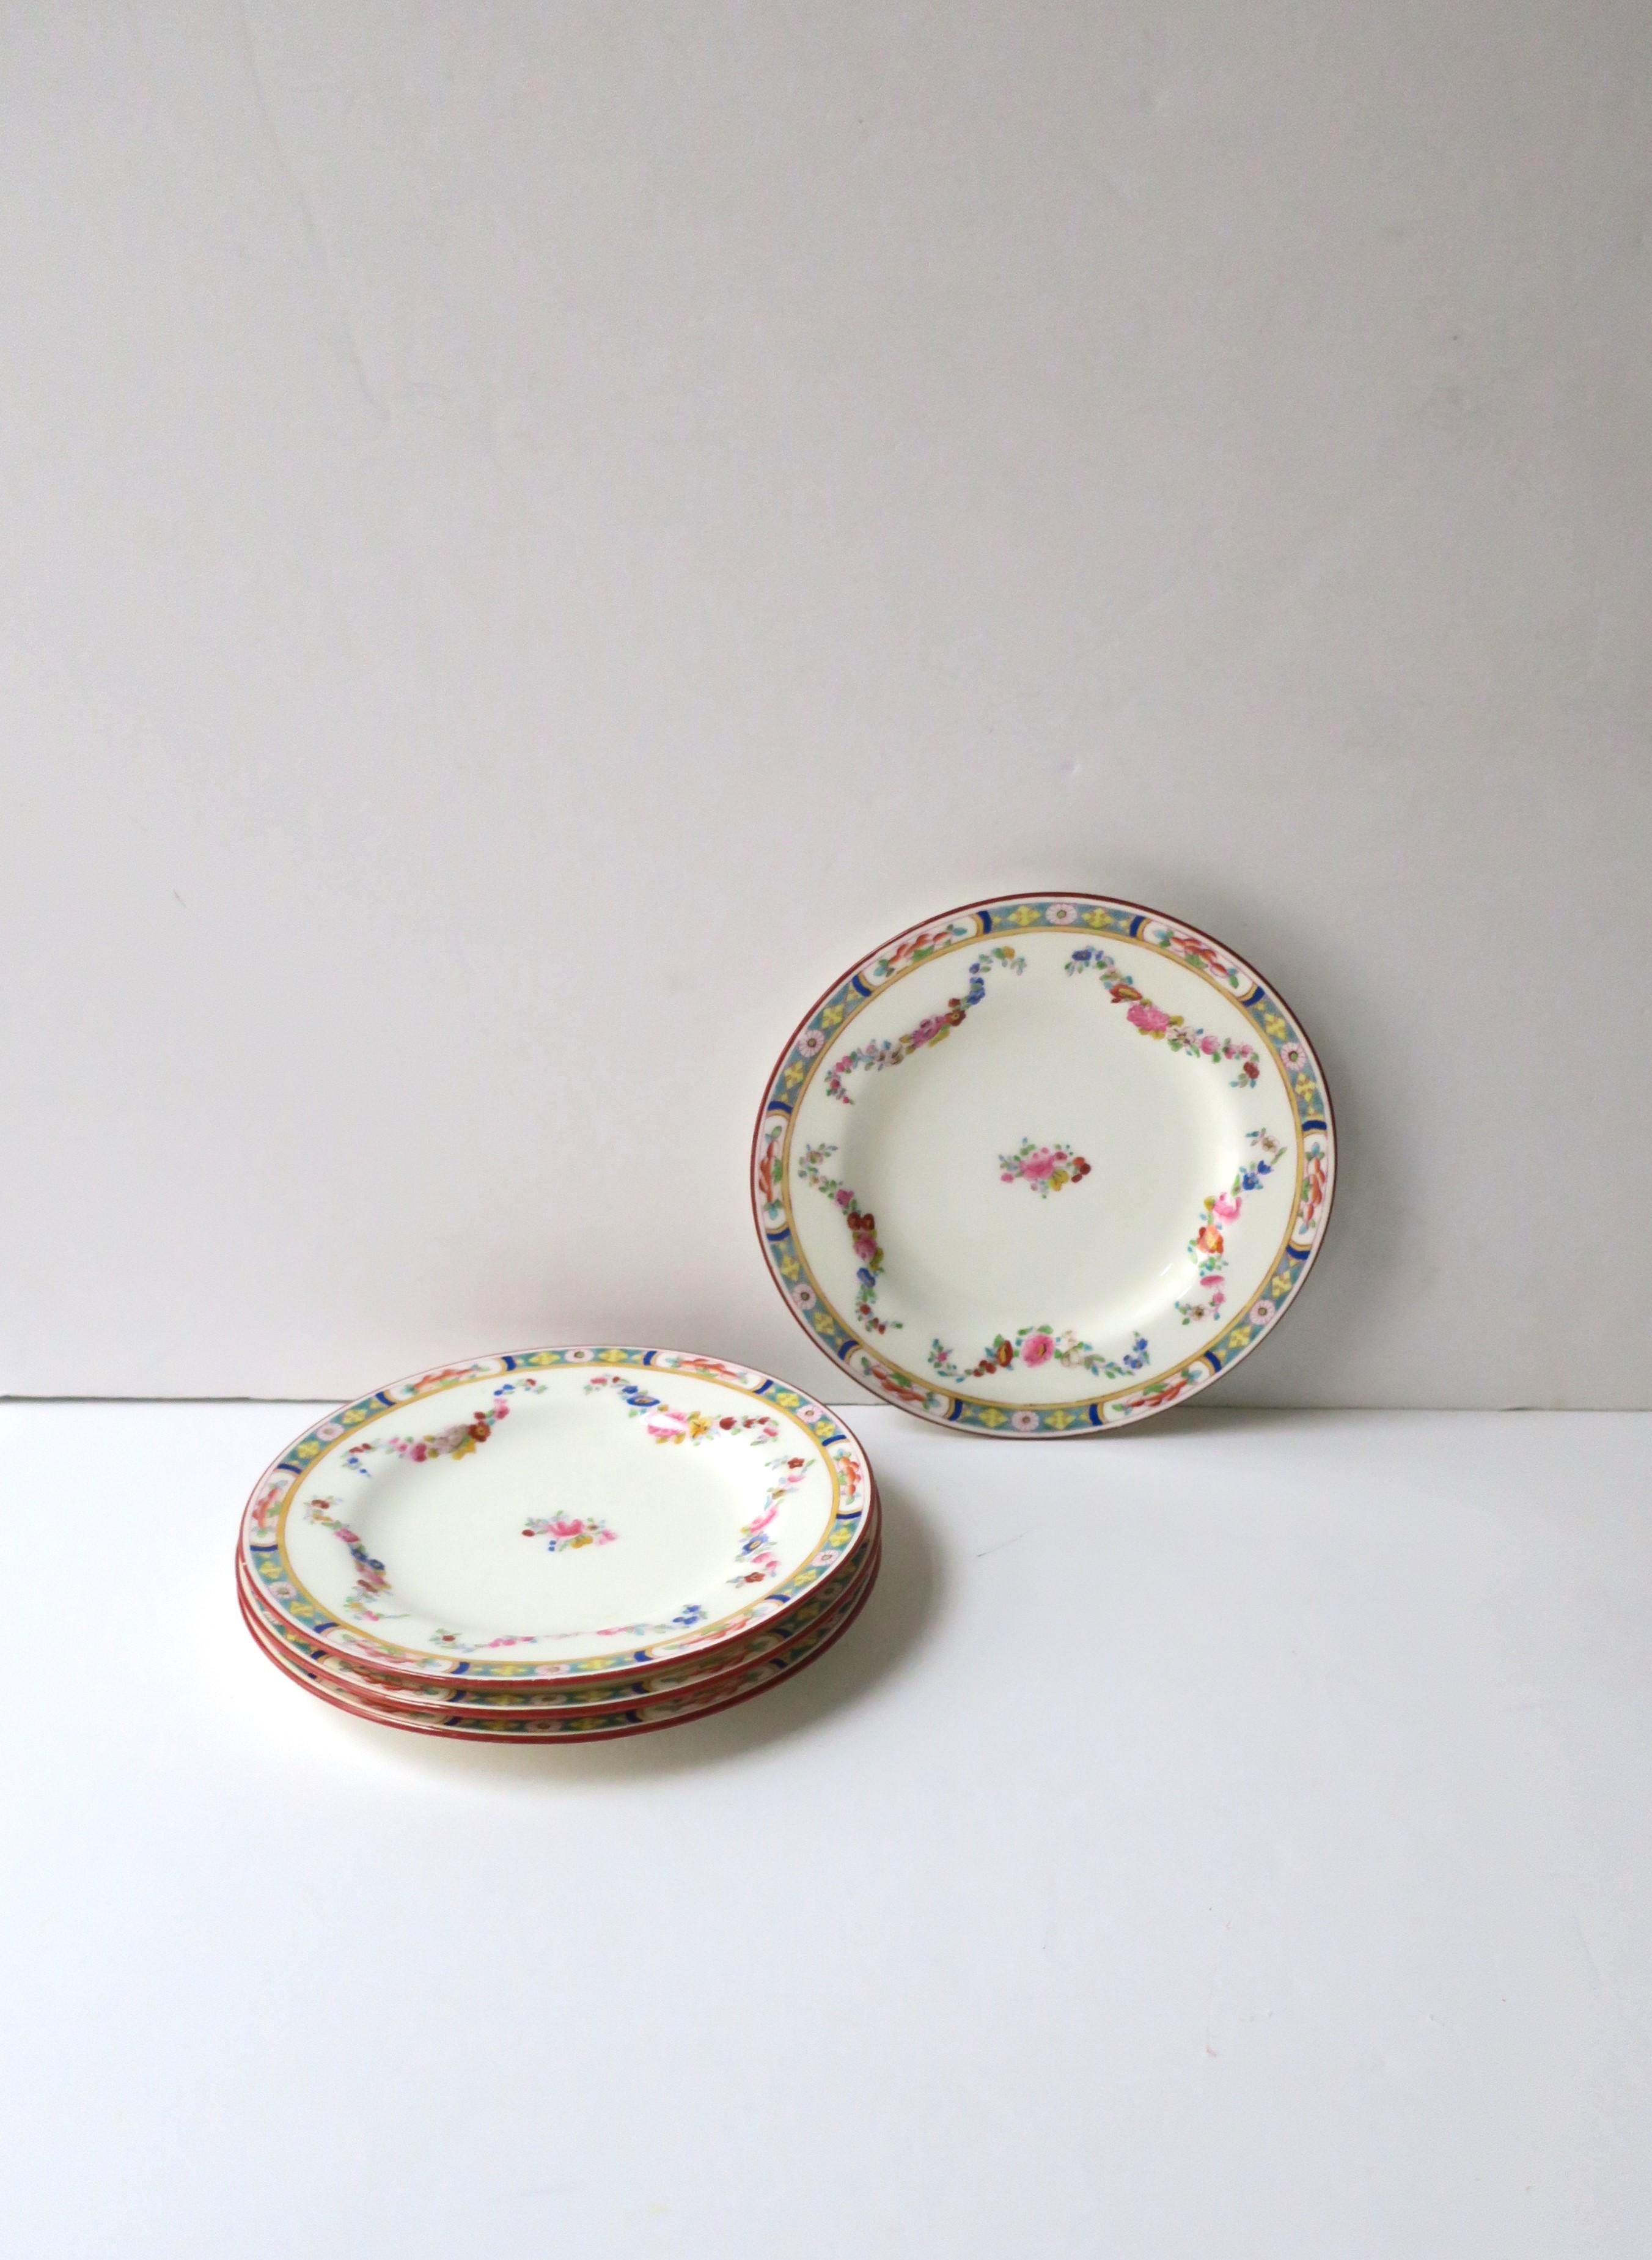 A rare set of four (4) English Minton porcelain plates, circa early-20th century, England. Plates were made exclusively for Rhodes Bros. Tacoma department store which opened in 1903, Tacoma, Washington. In addition to the beautiful flower and leaf